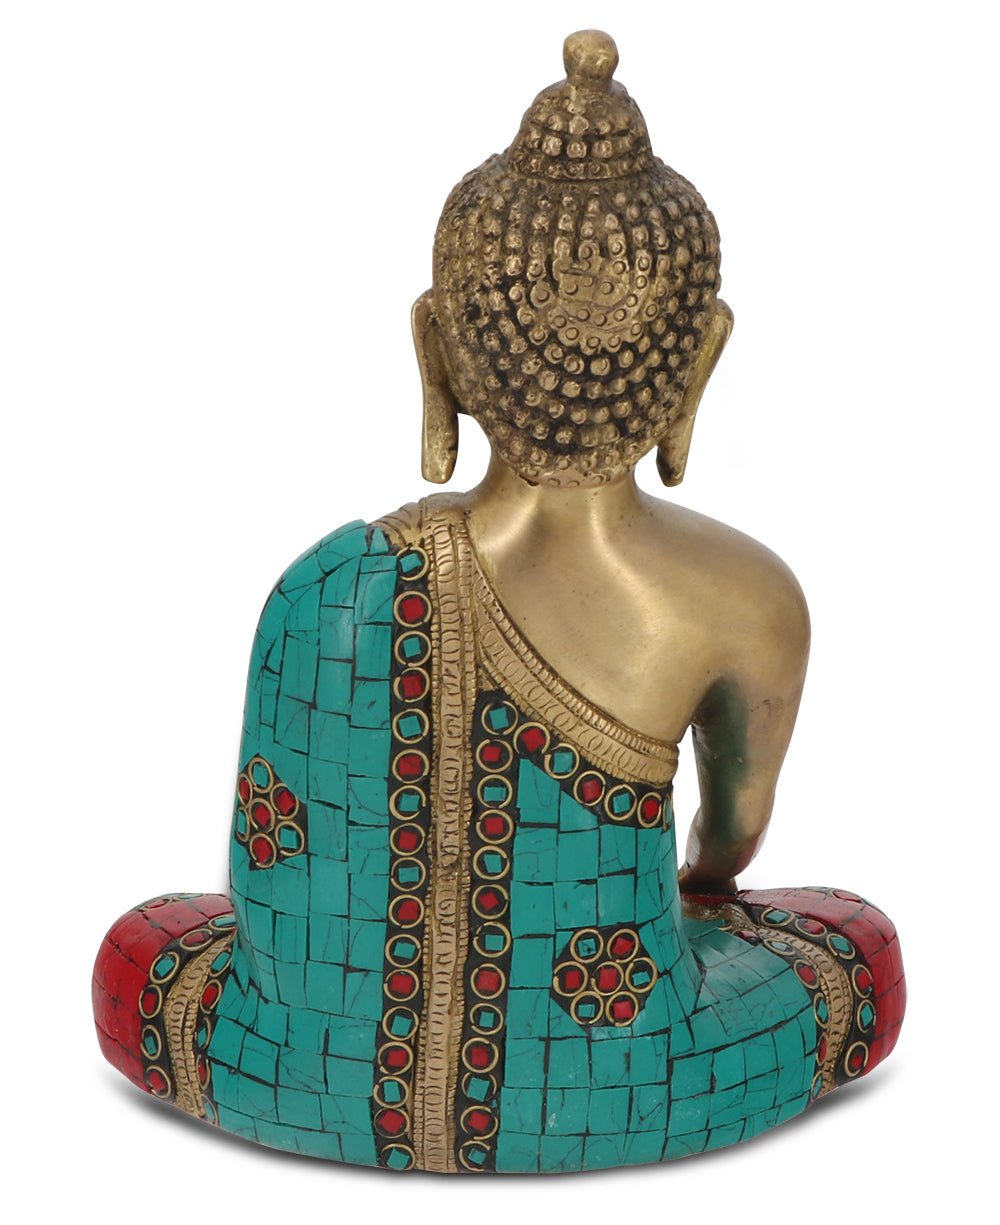 Brass Shakyamuni Buddha Statue with Colorful Detailing - Sculptures & Statues